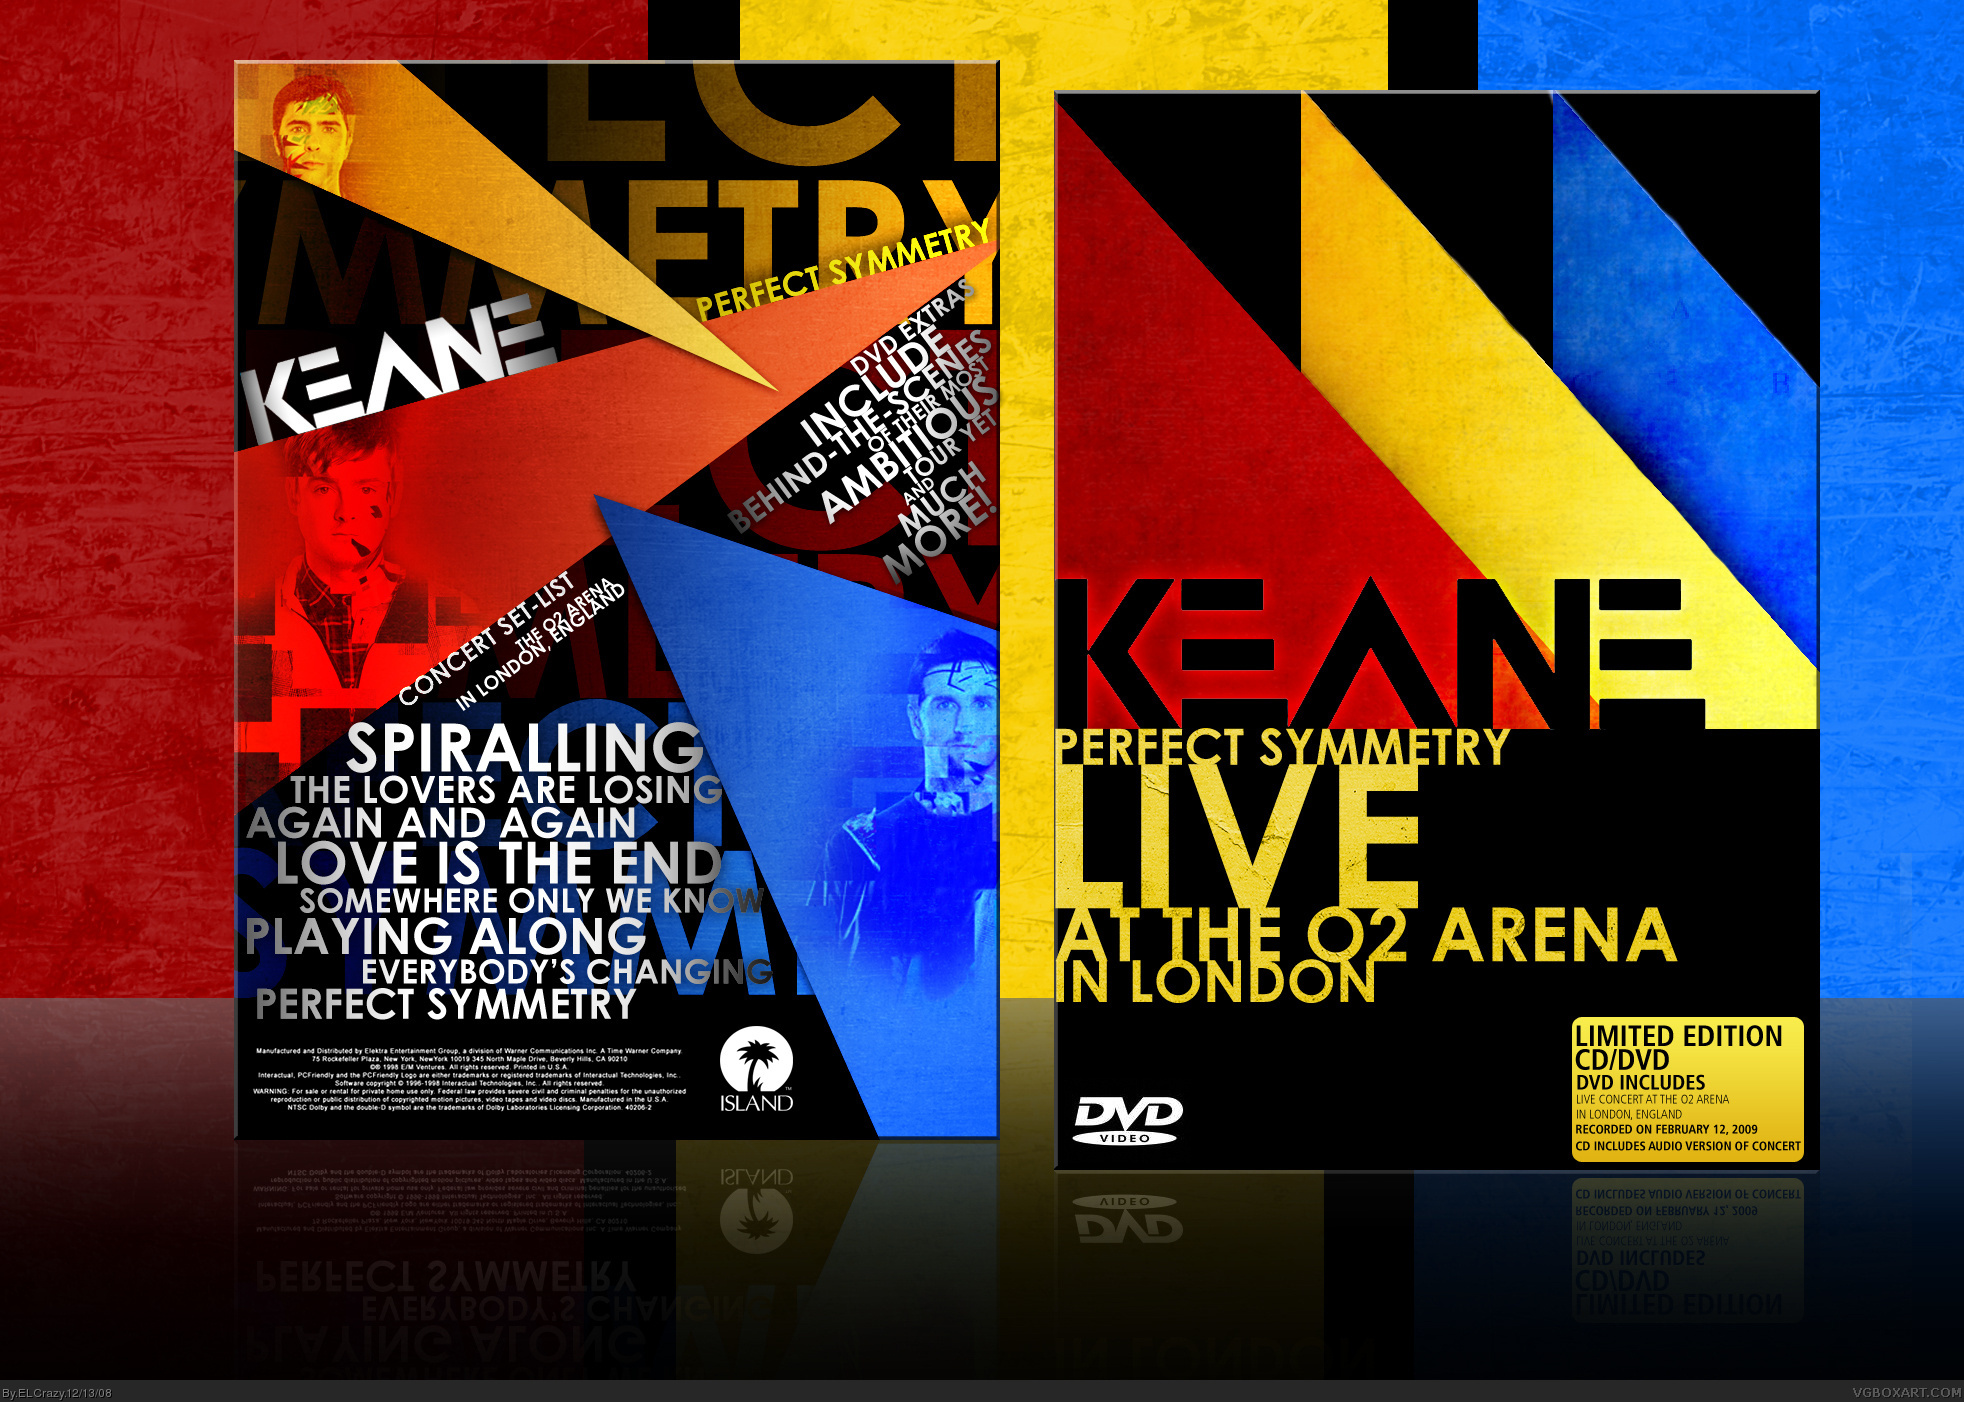 Keane: Perfect Symmetry Live at the O2 Arena box cover